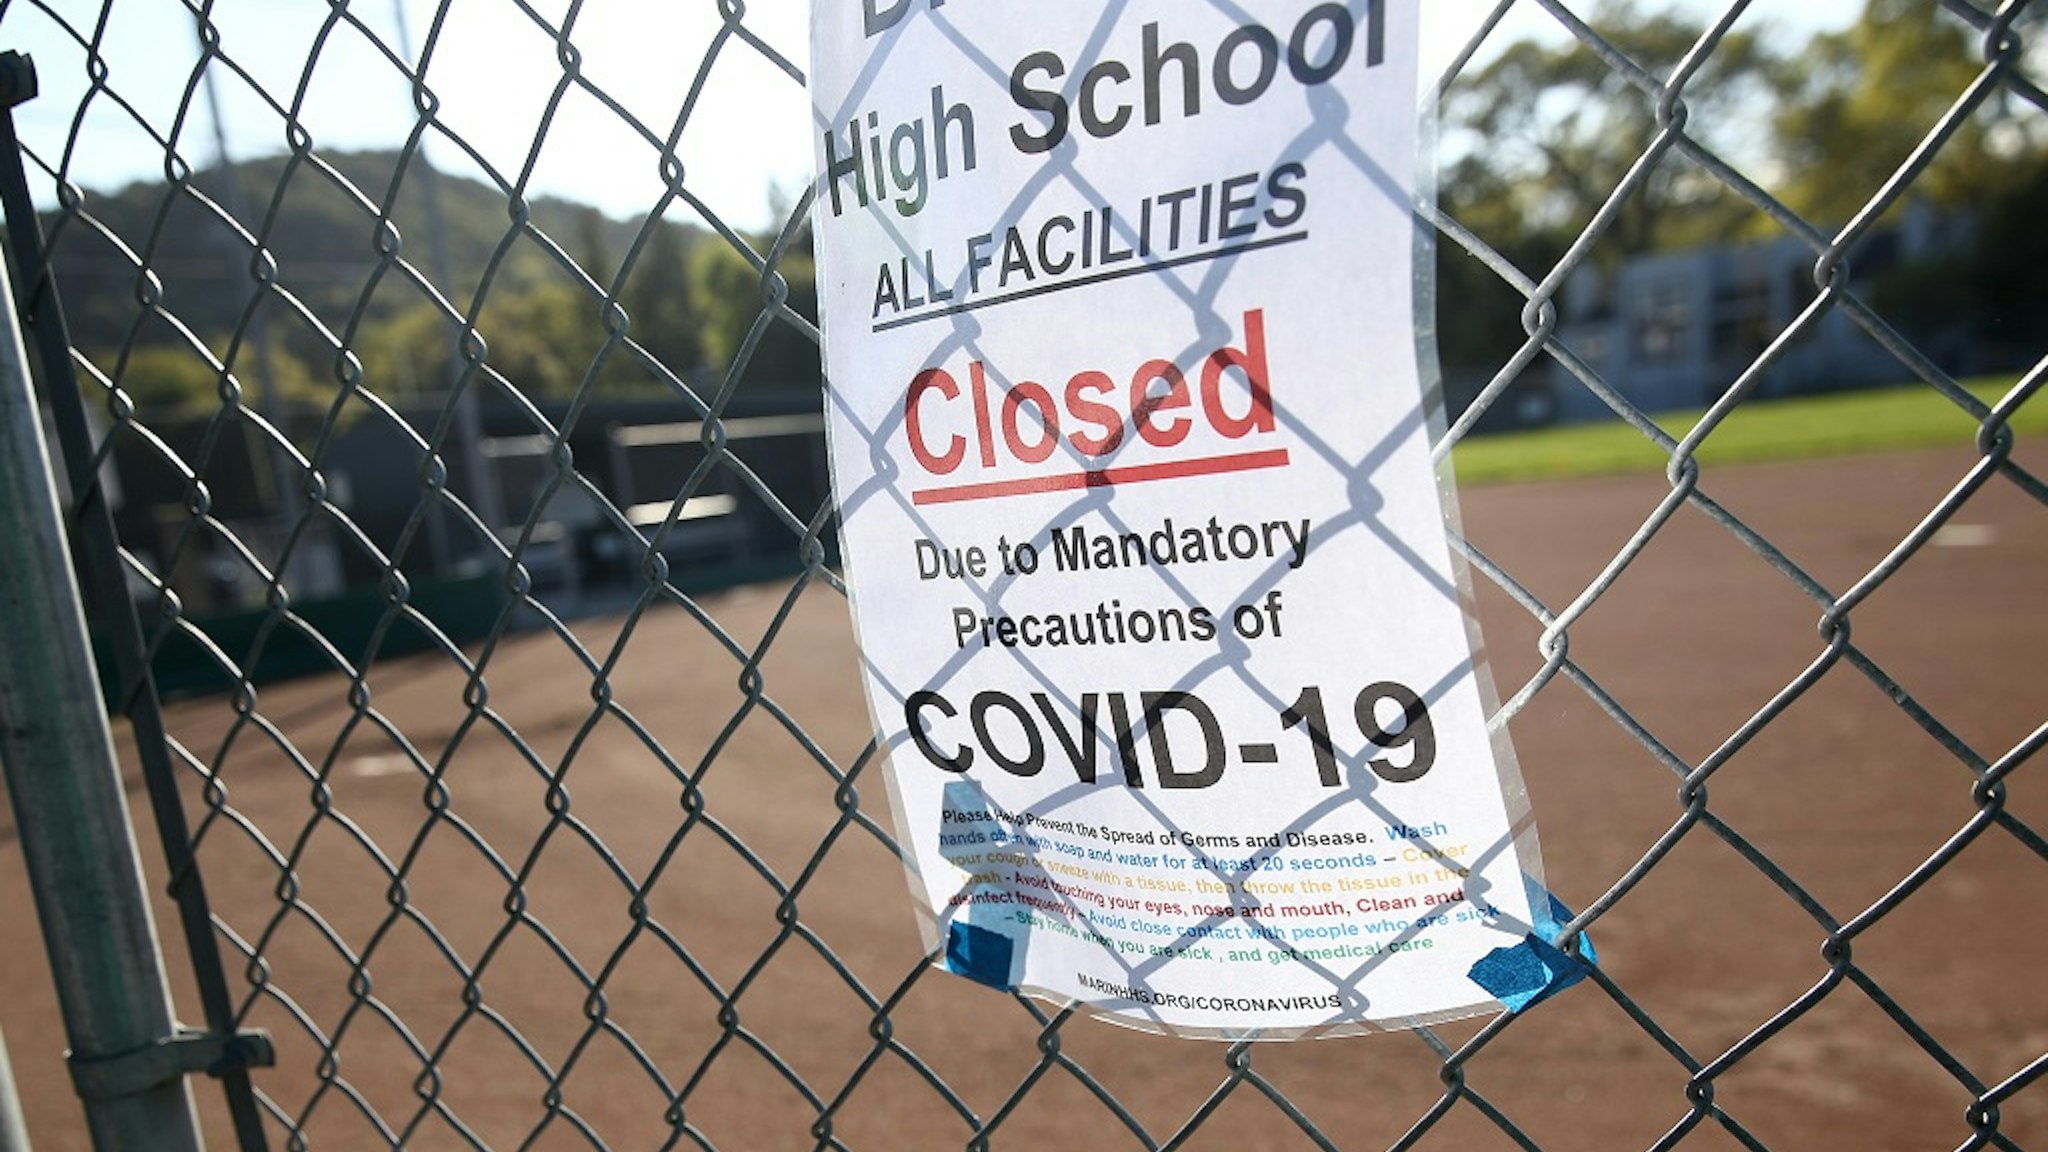 SAN ANSELMO, CALIFORNIA - MARCH 31: Signs outside Sir Francis Drake High School show that the school is closed because of the Coronavirus (COVID-19) on March 31, 2020 in San Anselmo, United States.